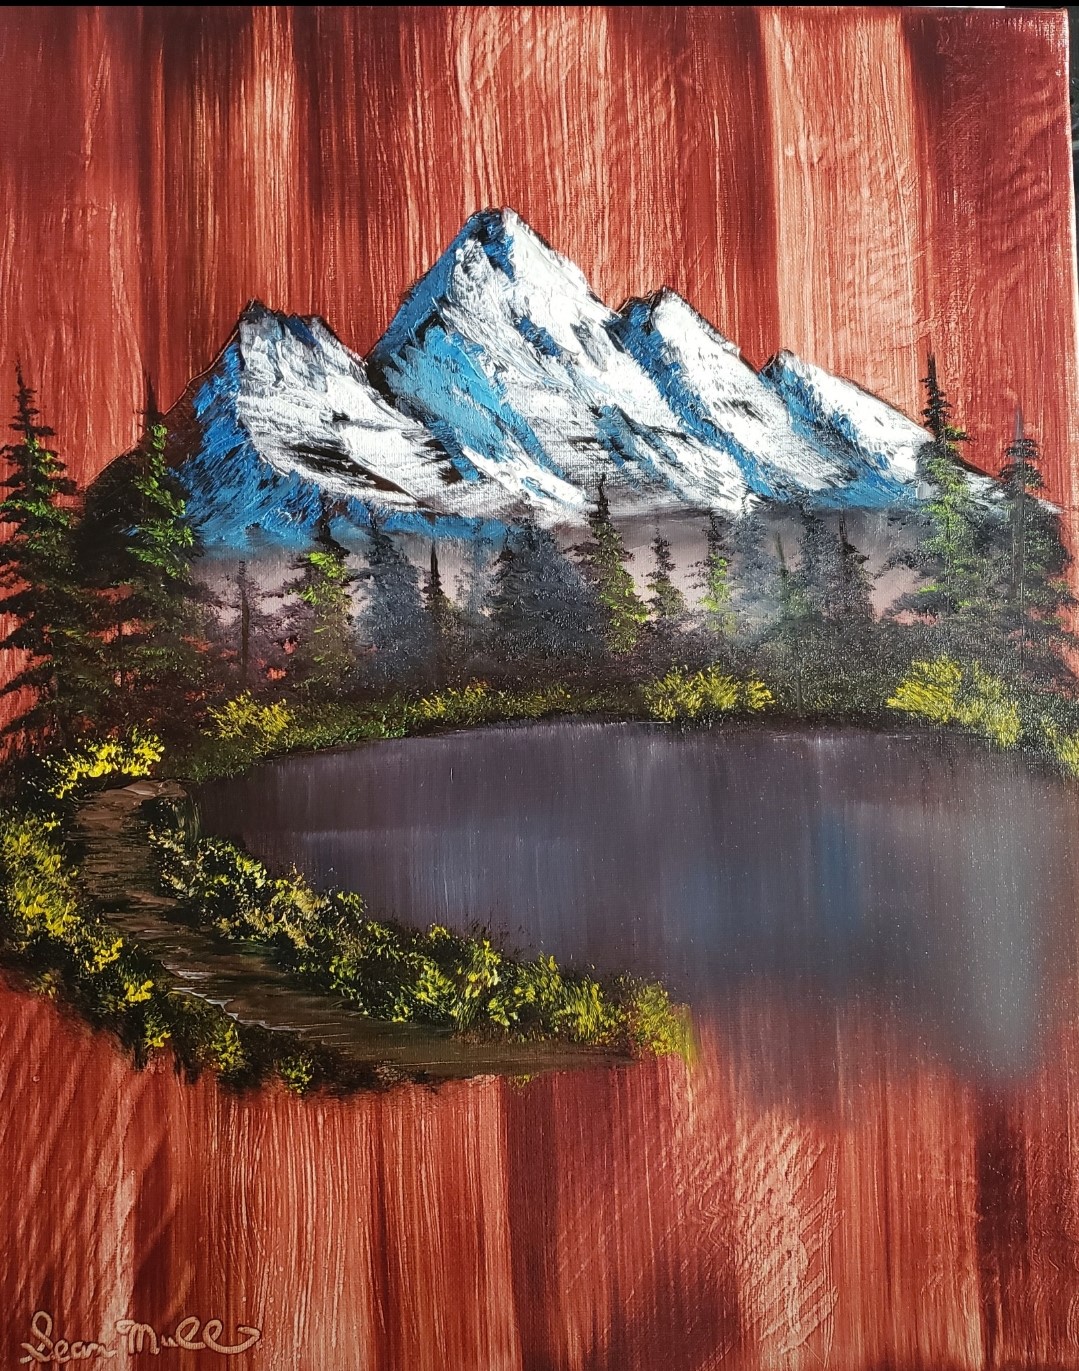 Experience the Joy of Painting…the Bob Ross way but Smaller